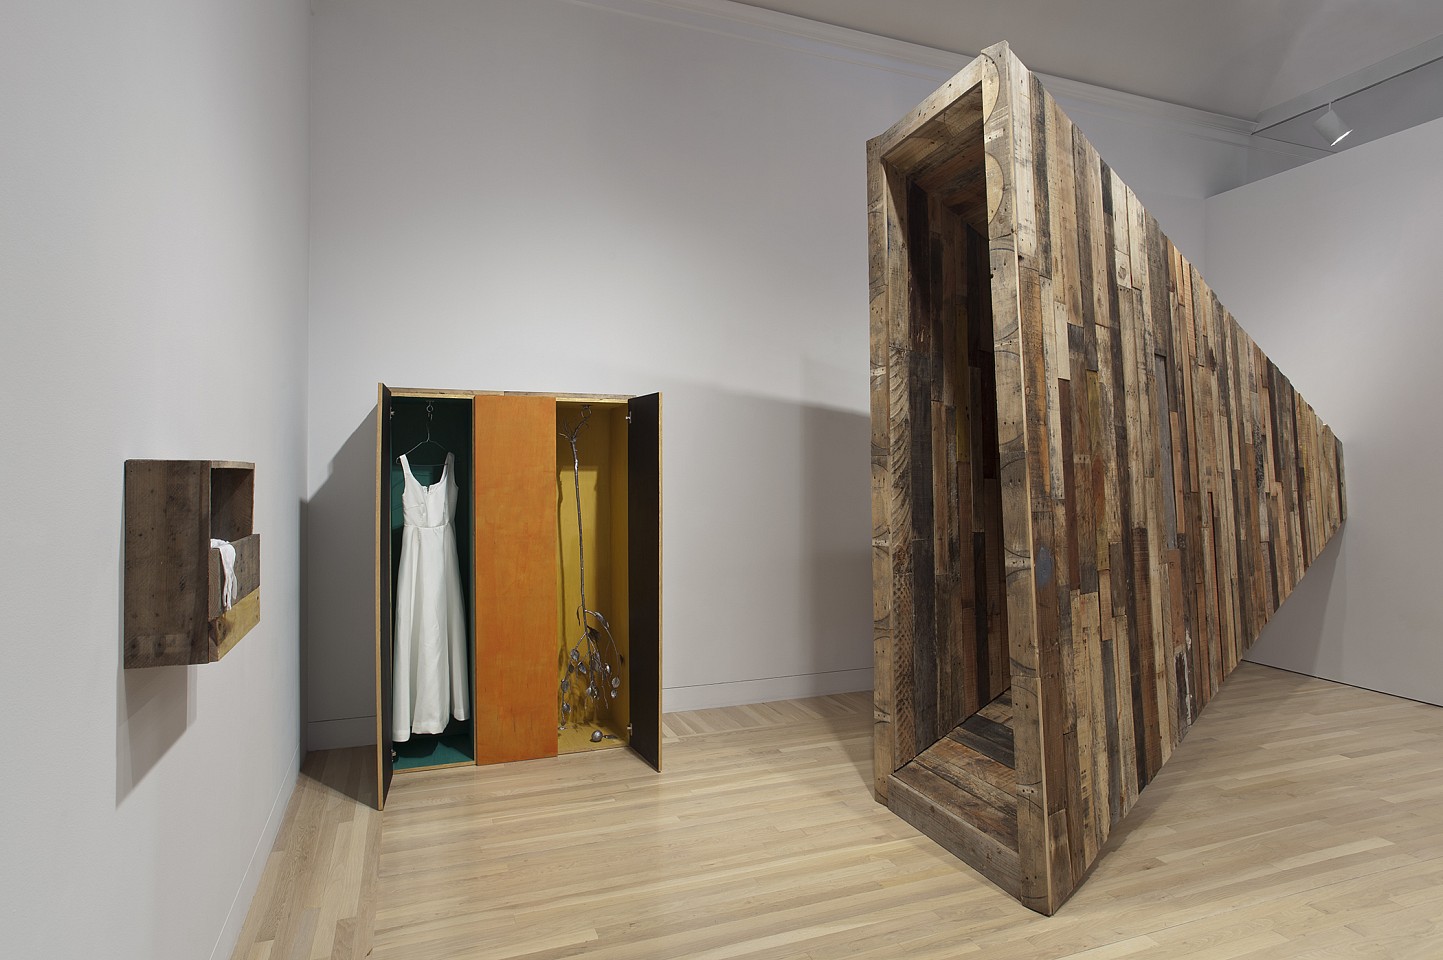 Liz Glynn
Anonymous Needs and Desires (Gaza/Giza) (R), (Passage Gaza/Giza) (L), 2012
Reclaimed forklift pallet stock, wood with casein paint, cast lead, reinforced Kevlar, ballistic nylon, resin, Cabinet 72 x 48 x 18 inches
Tunnel 118 x 38 x 171 inches